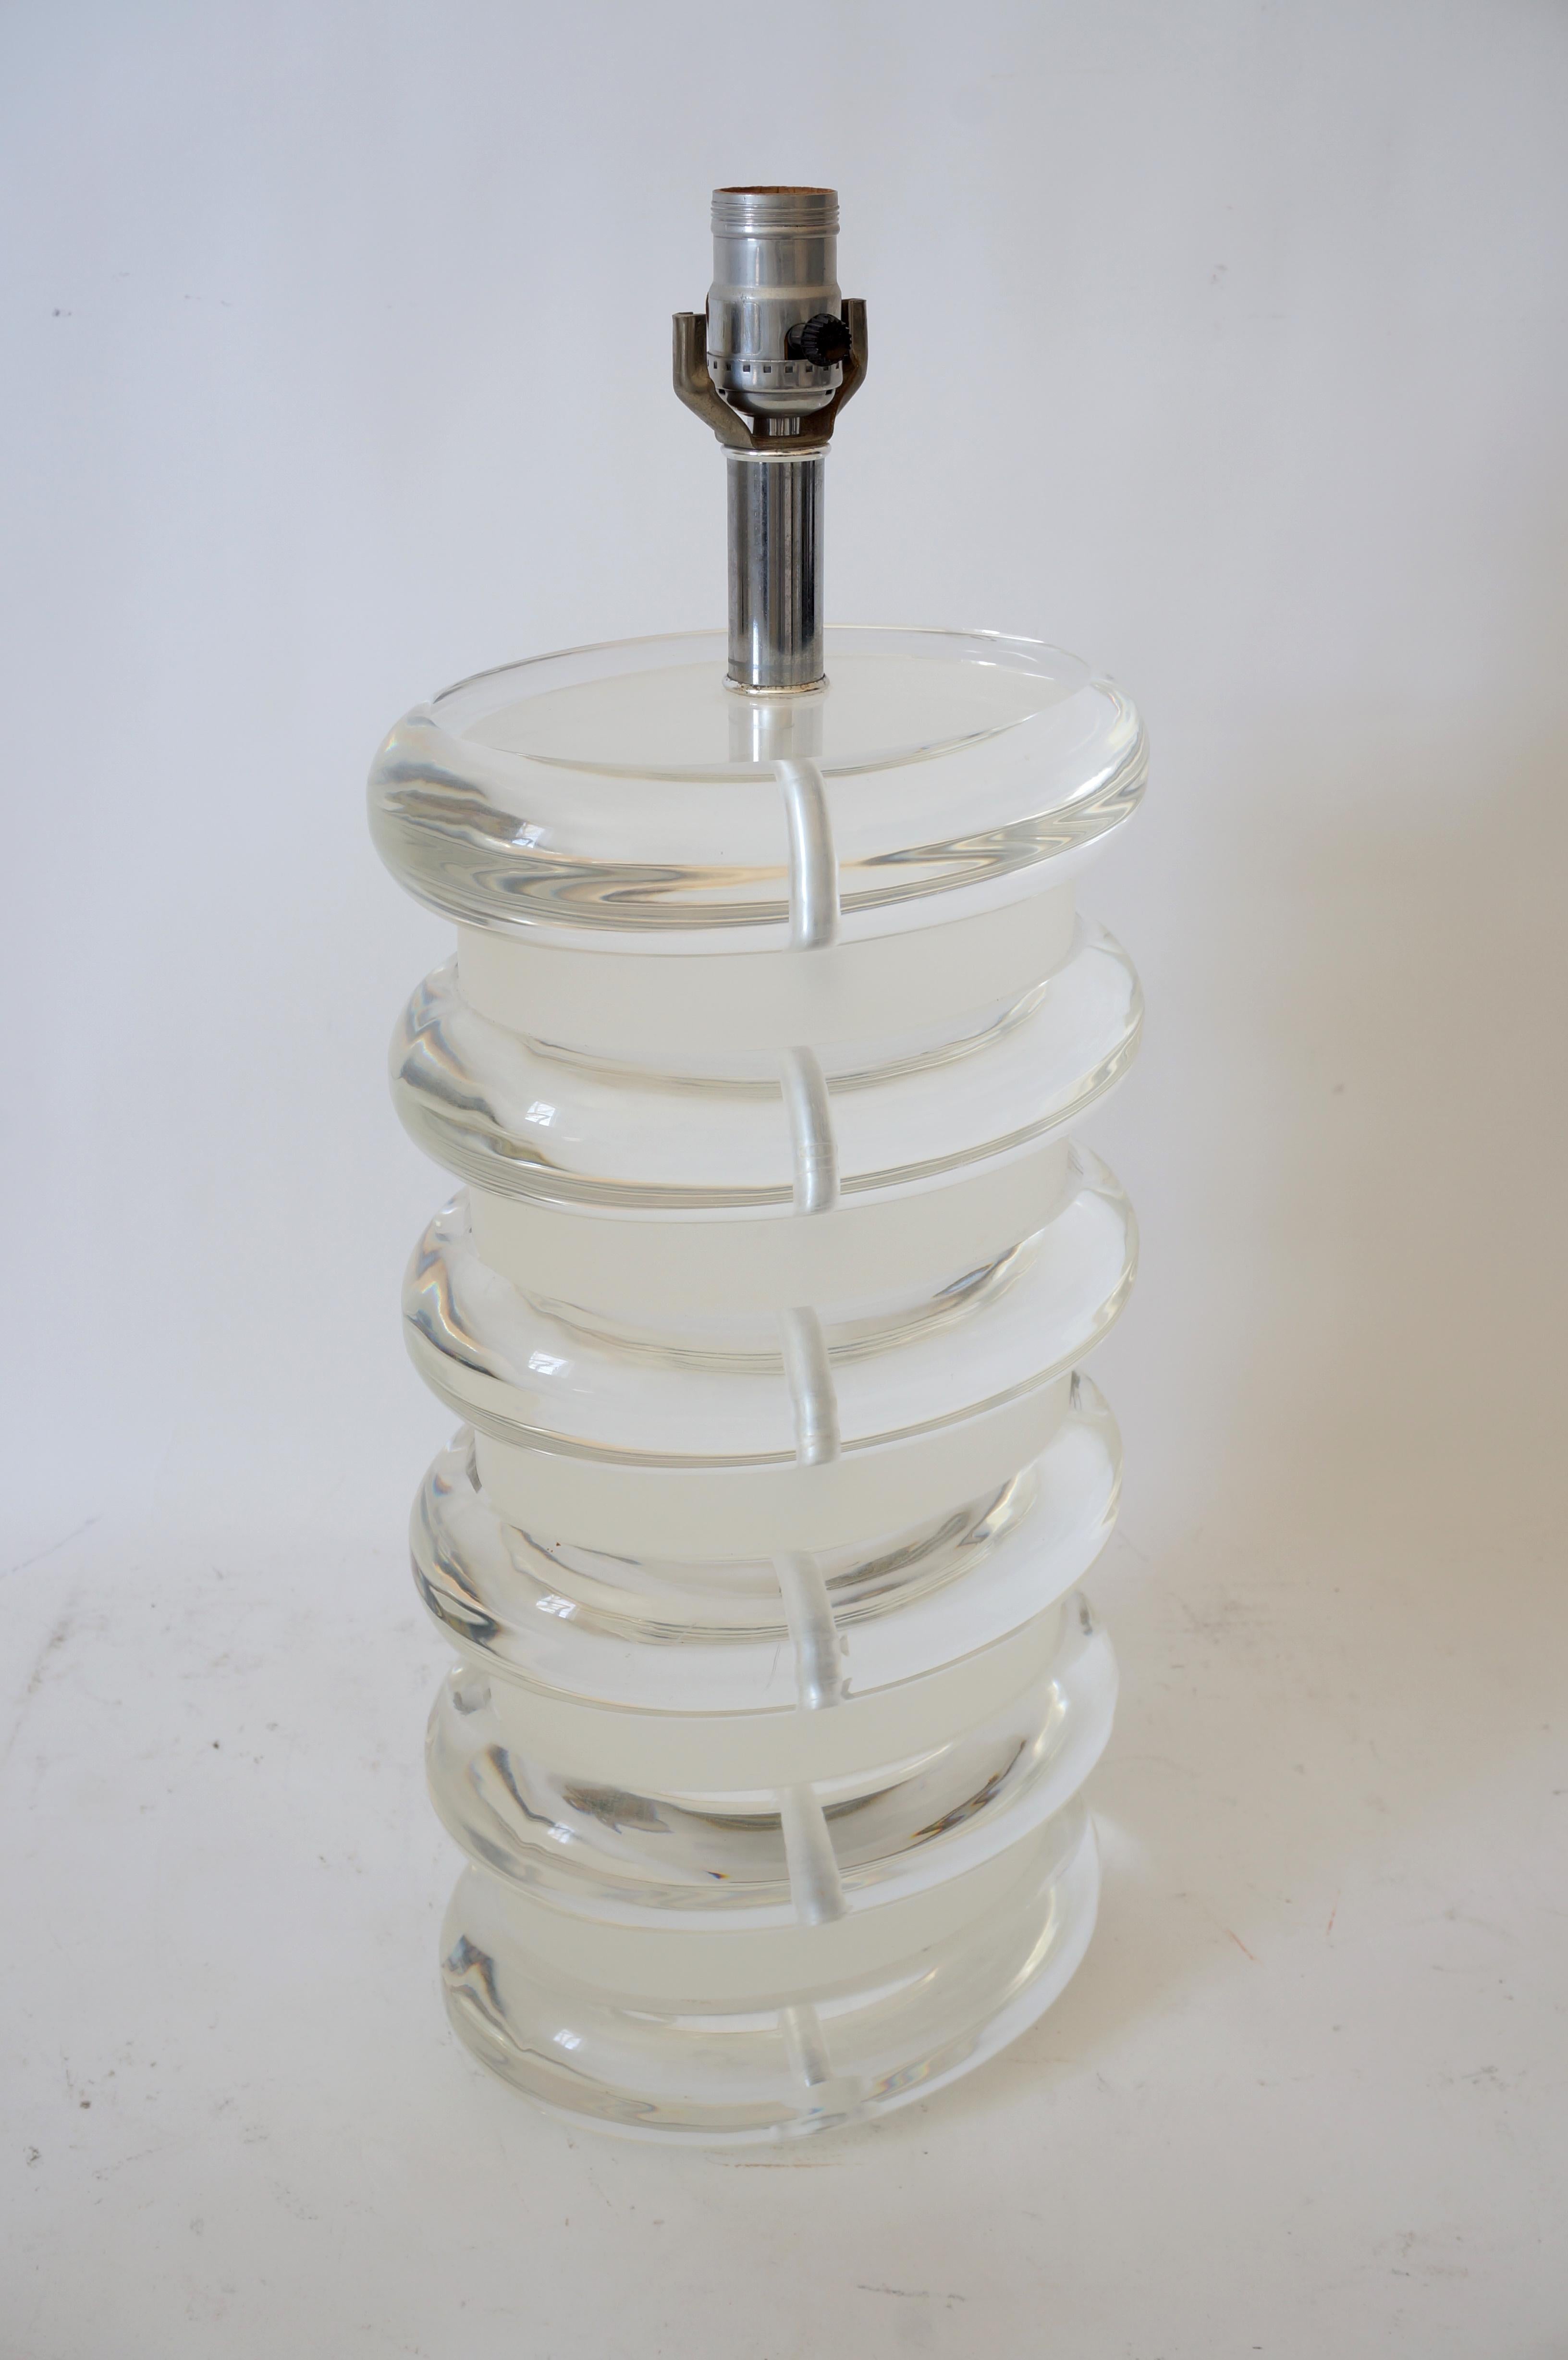 This large scale, chic and stylish Bauer lucite lamp dates to the 1970s-1980s and is fabricated from one solid block of lucite that is finished in a clear and satin finish.